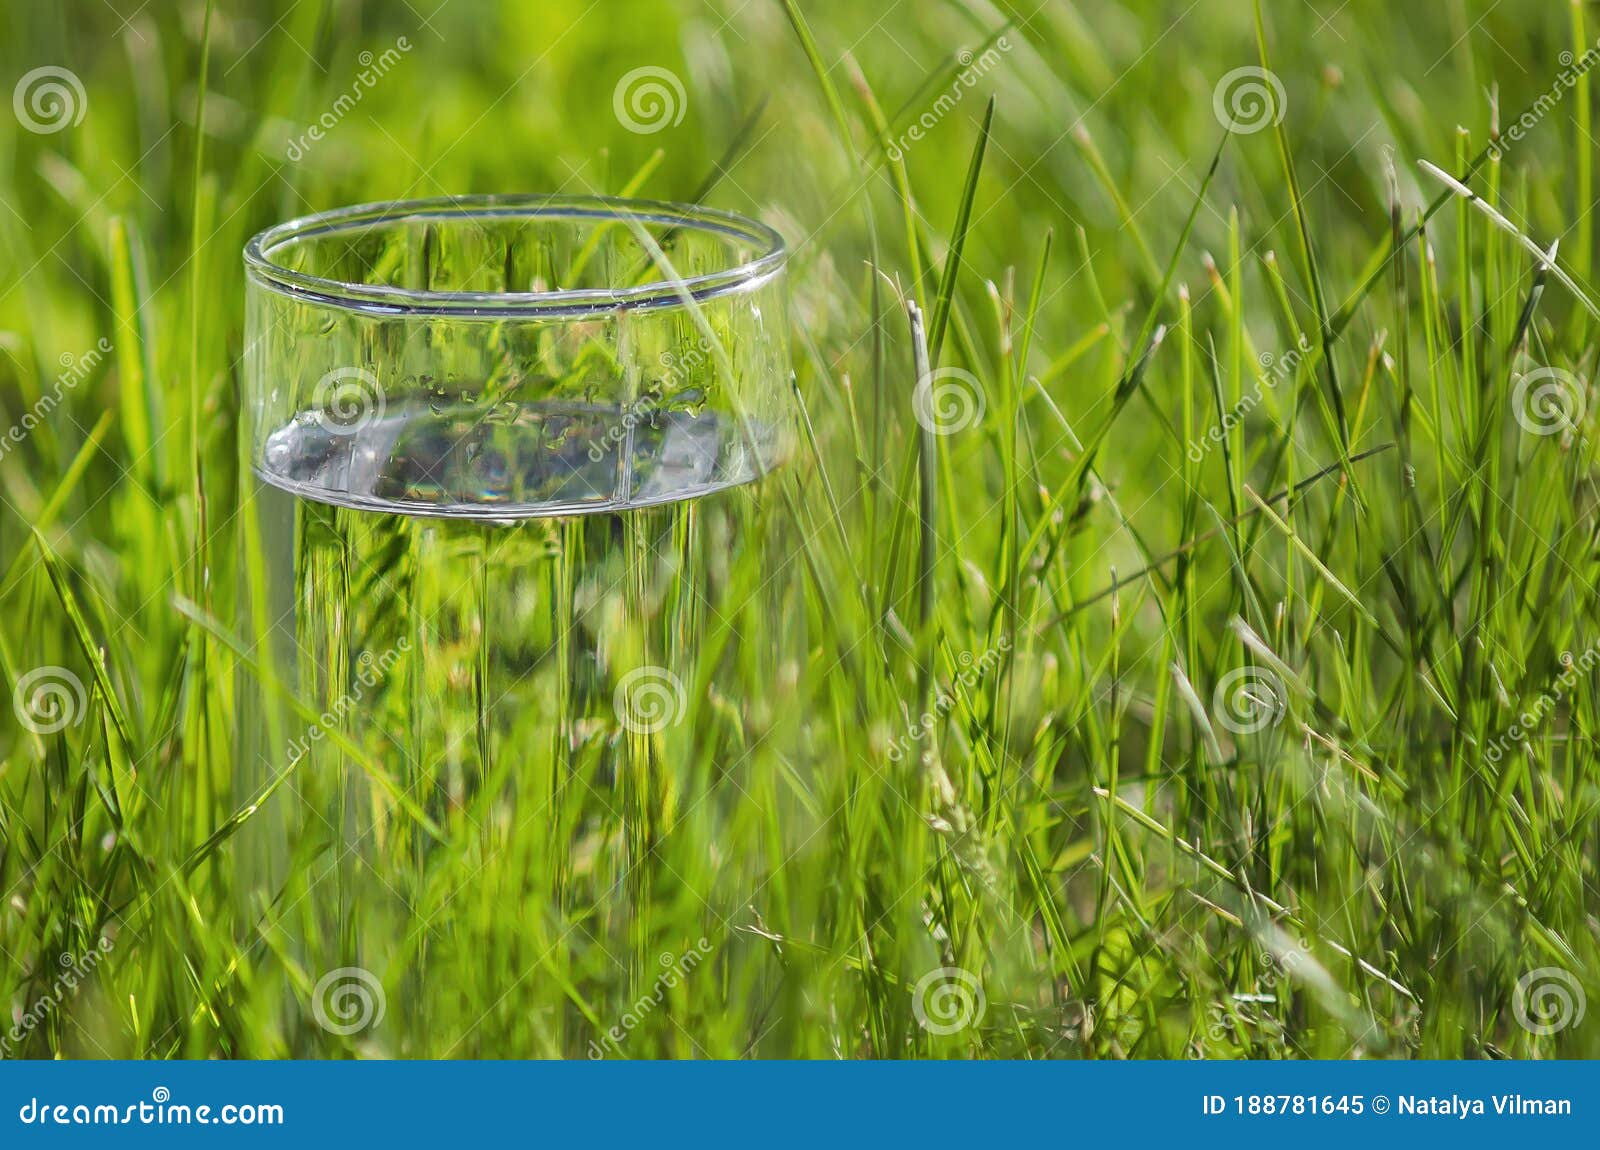 Glass And A Cup With Transparent Cool Clean Water On A Green Garden  Background Clean Water Health Food Industry Health Ecology Environmental  Protection Thirst Quenching Stock Photo - Download Image Now - iStock